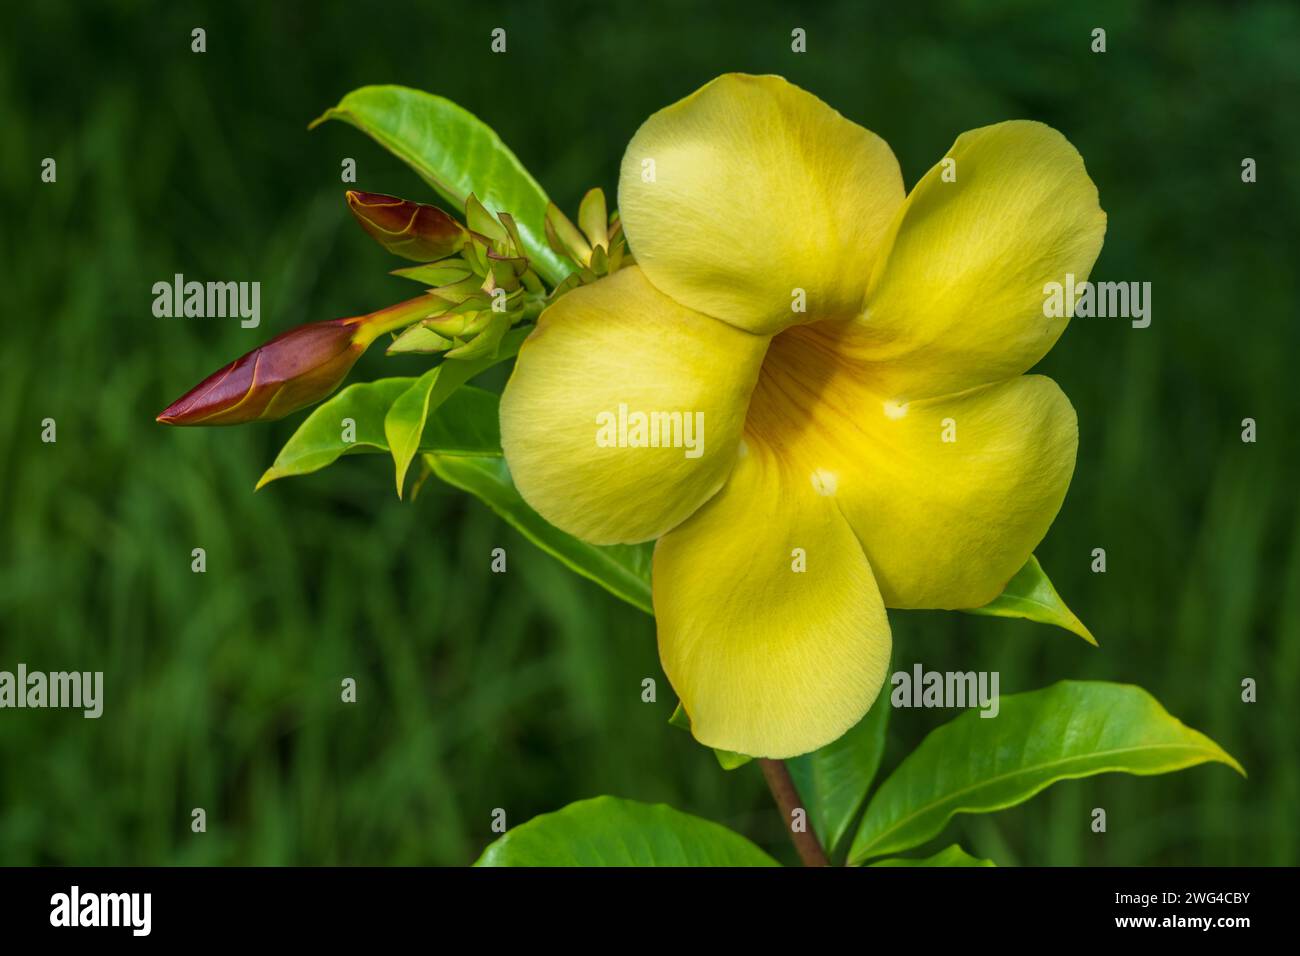 Closeup view of yellow flower of tropical shrub allamanda cathartica aka golden trumpet or common trumpet vine blooming outdoors on natural background Stock Photo